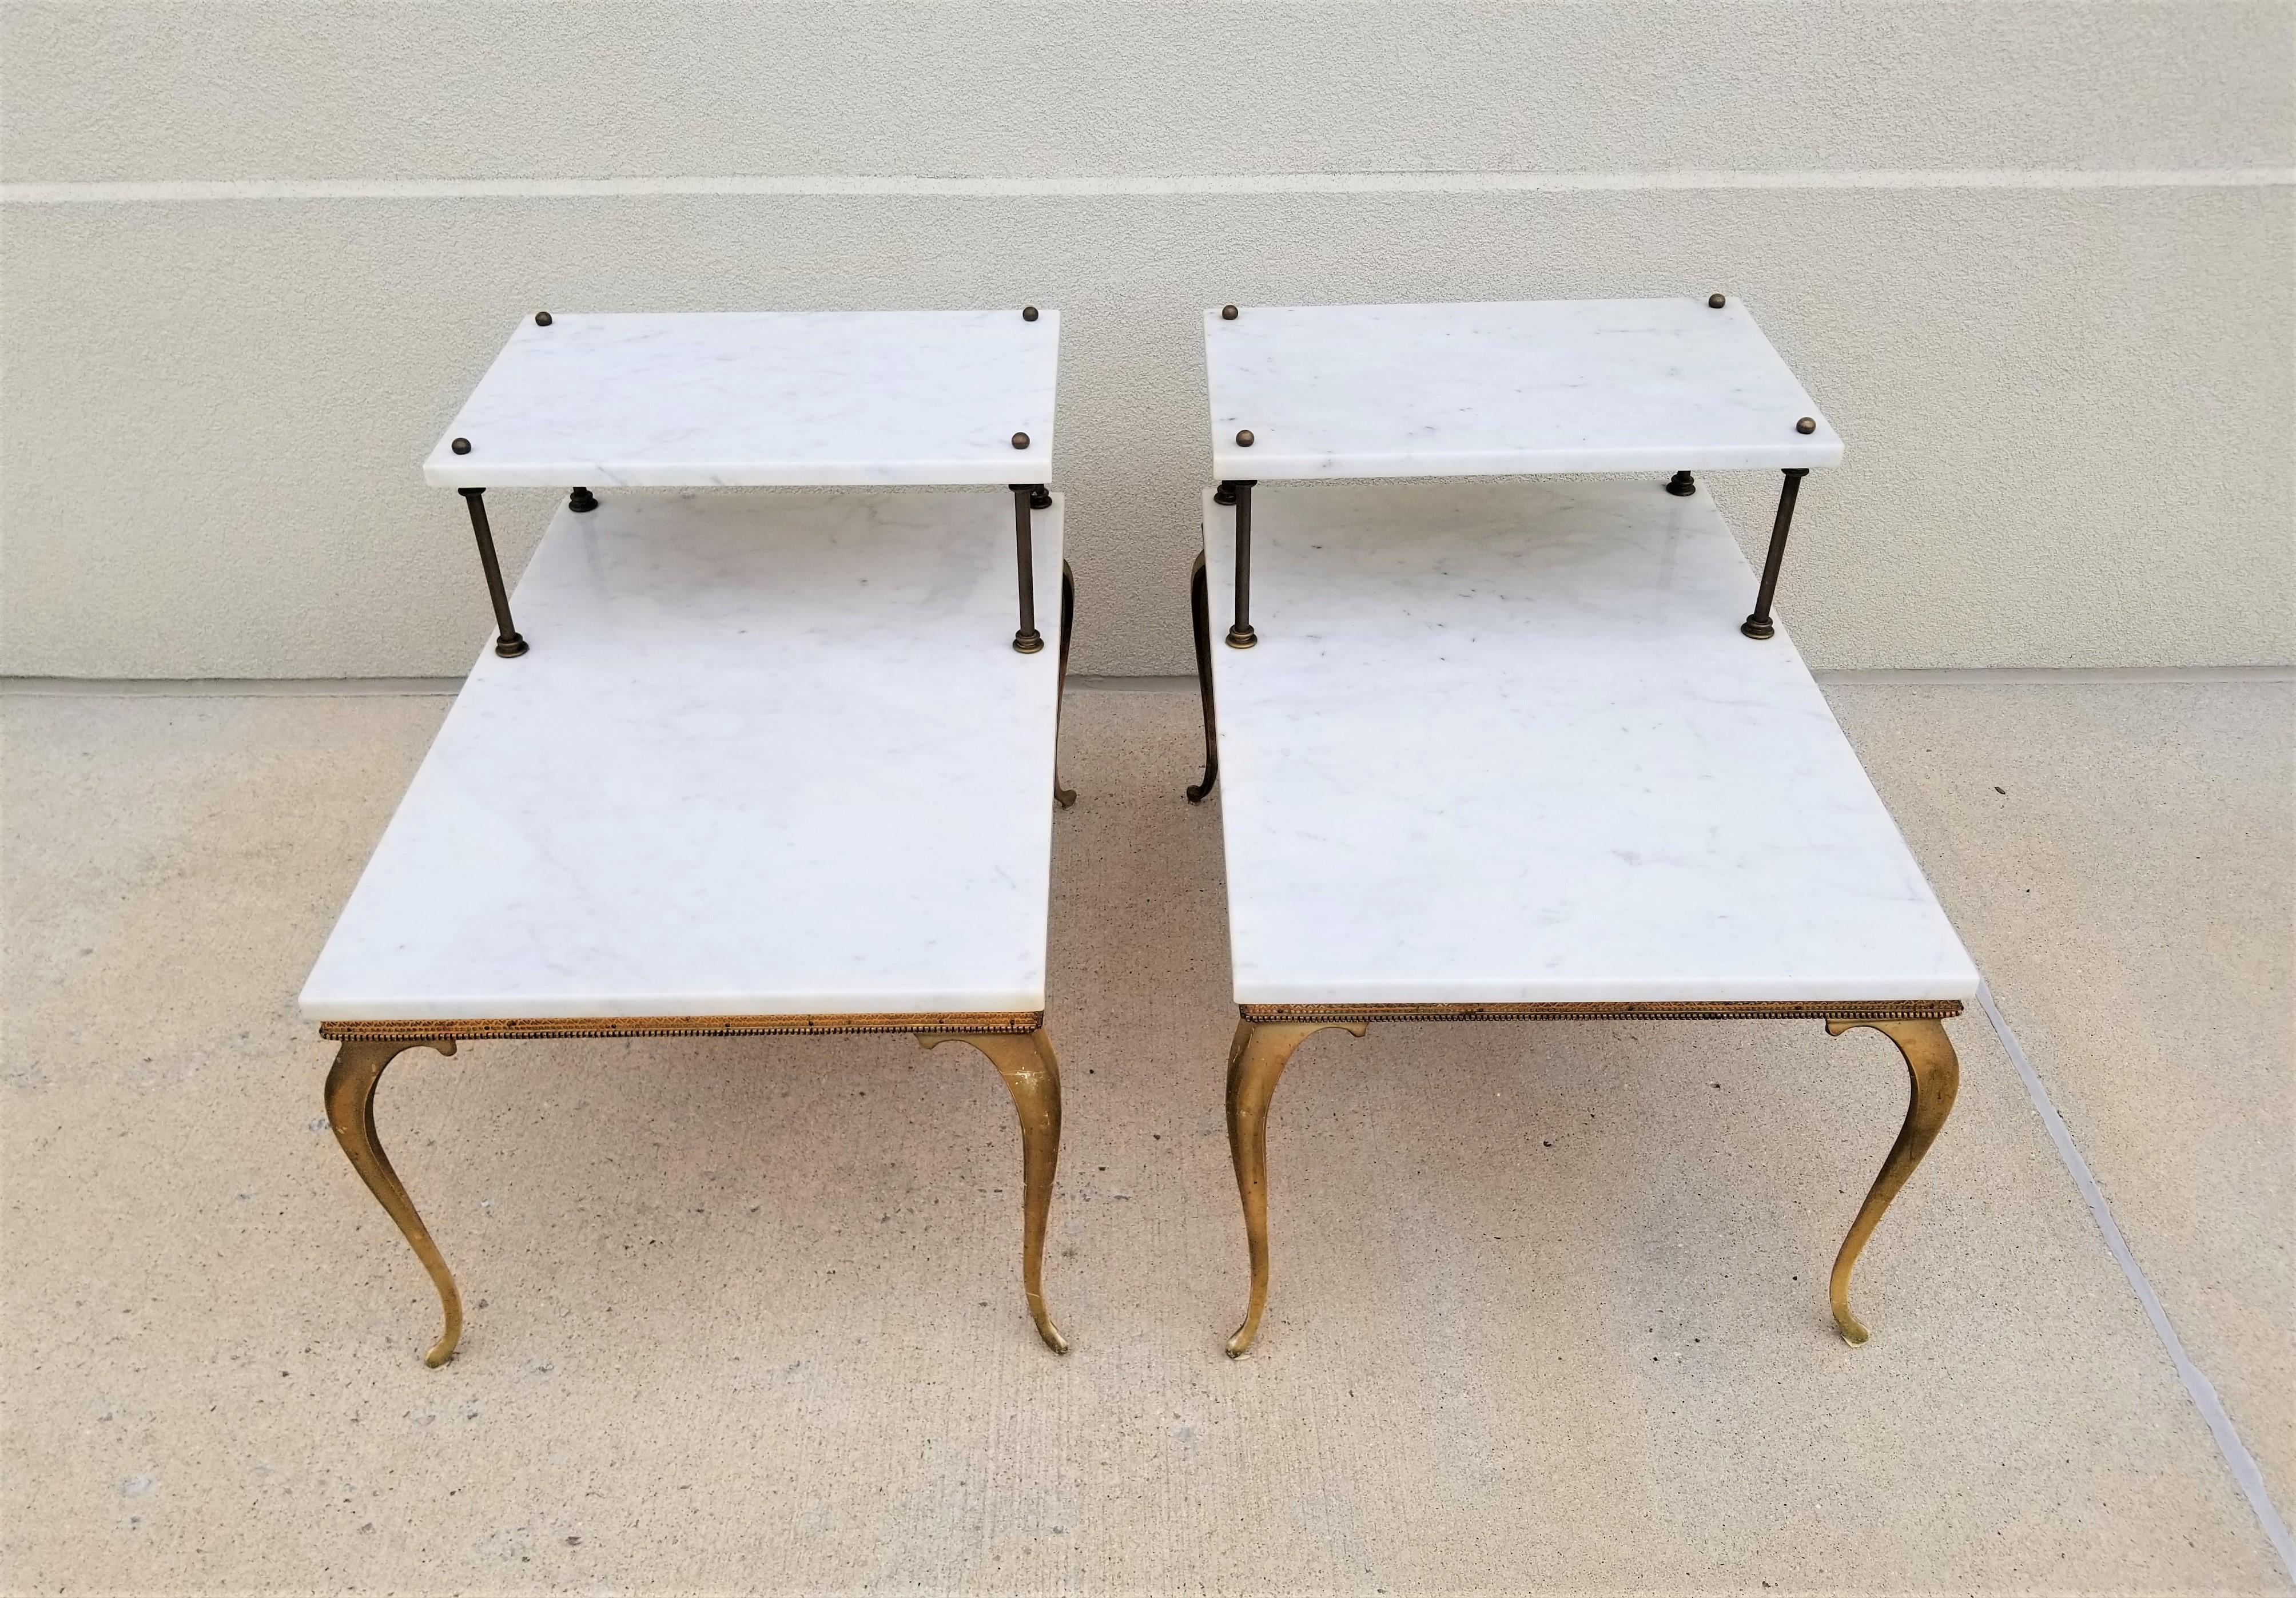 Italian Marble midcentury 1950s 1960s Tiered End Tables. Carrera Marble. Brass Hardware. Gilded Iron legs with French Provincial design. Both Marked Made in Italy. 

Measurement:
Height to top of Brass Ball: 24.0 inches
Height to top of second